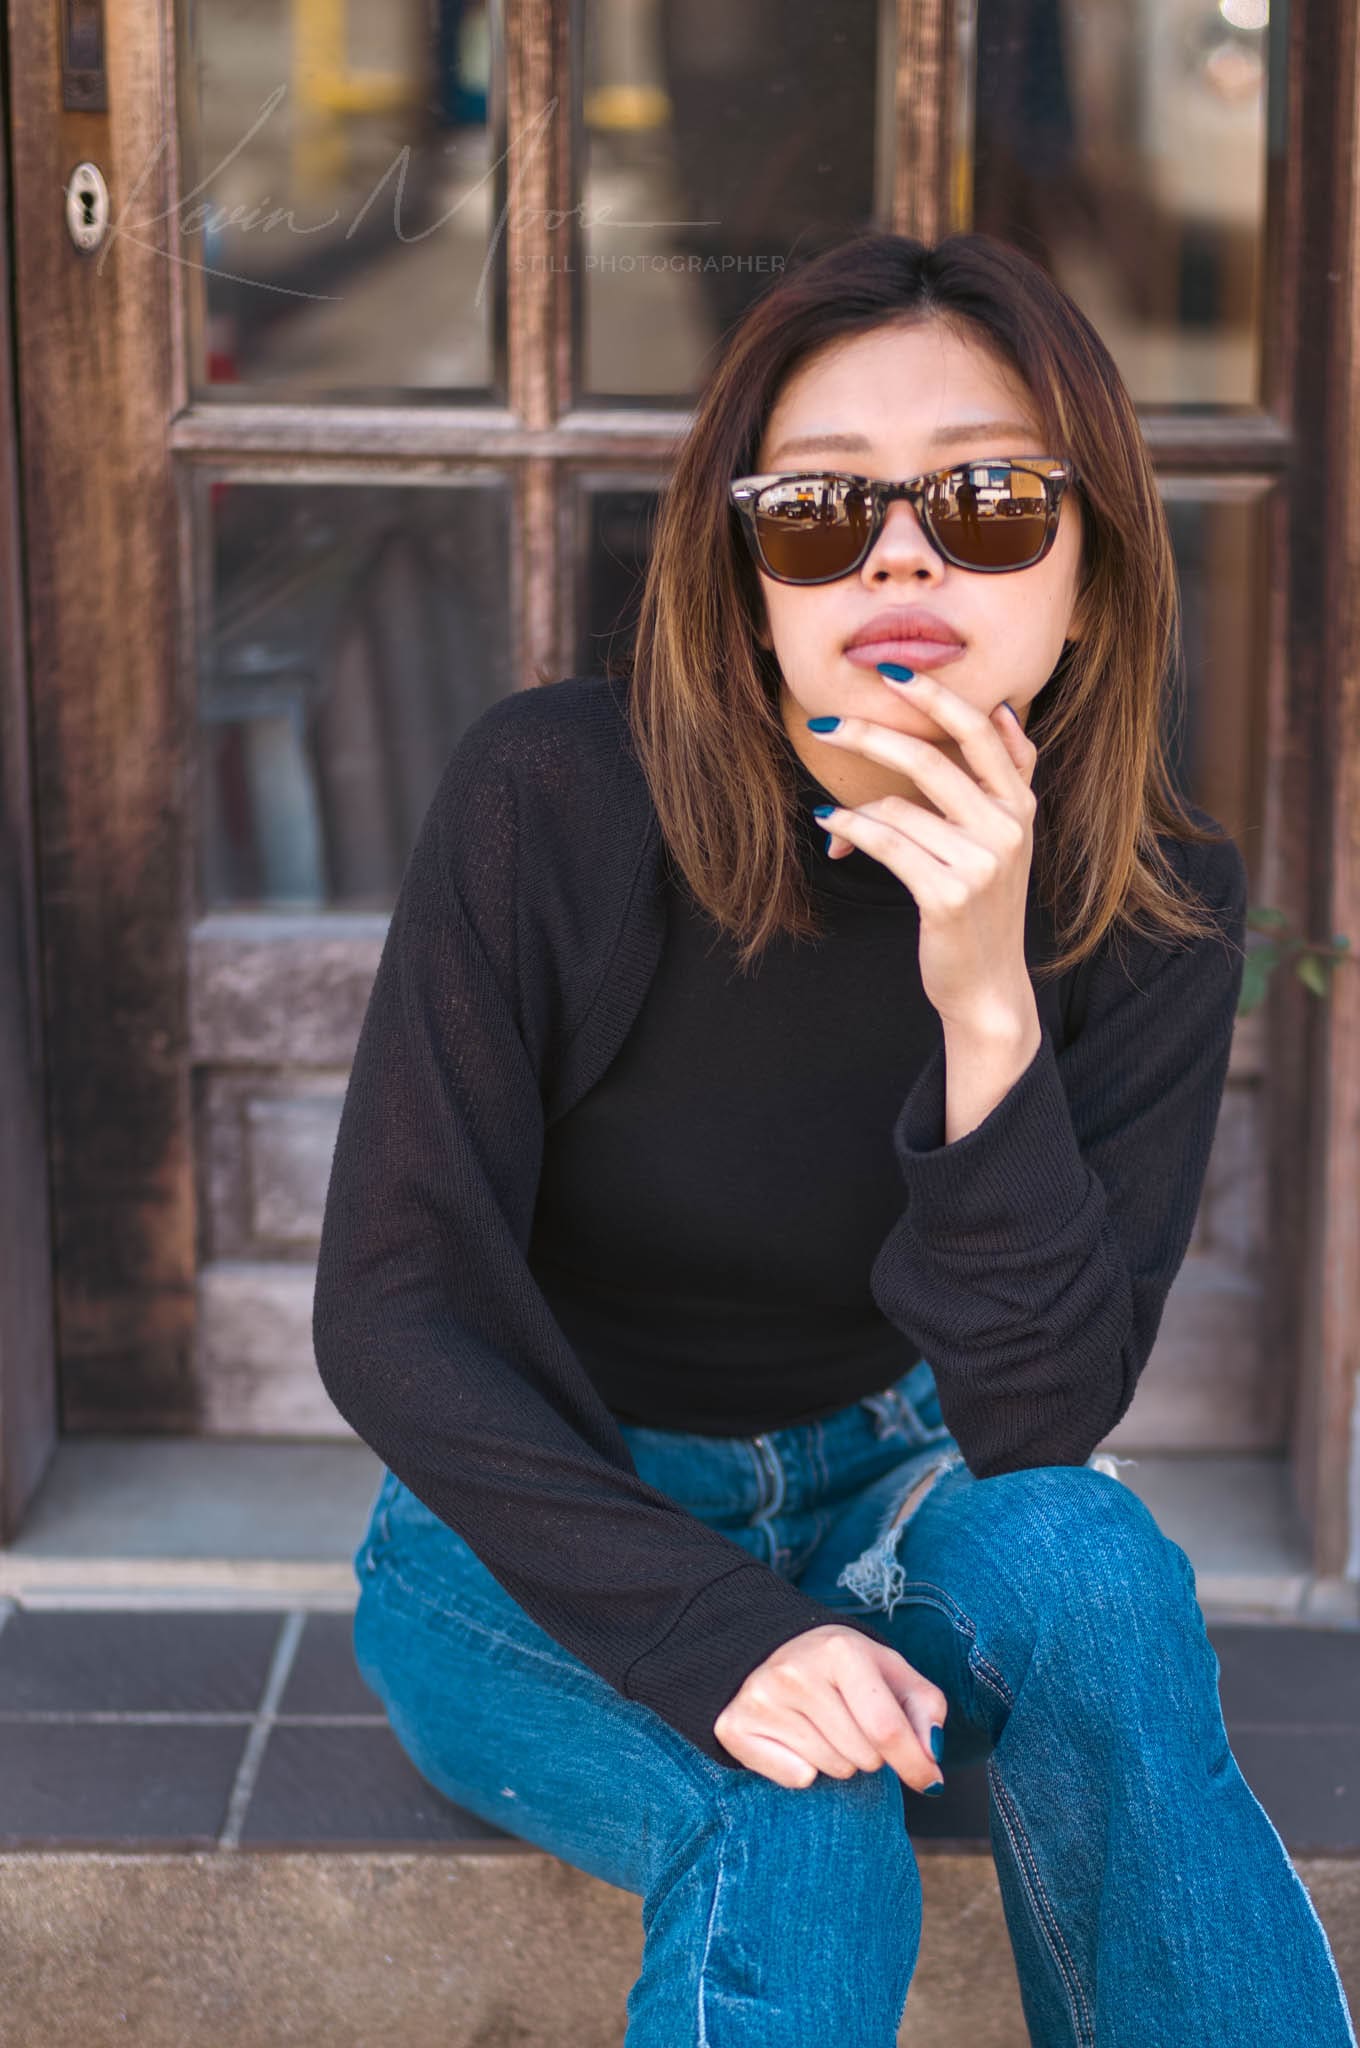 Young woman in sunglasses seated by vintage wooden door, wearing casual black top and blue jeans.